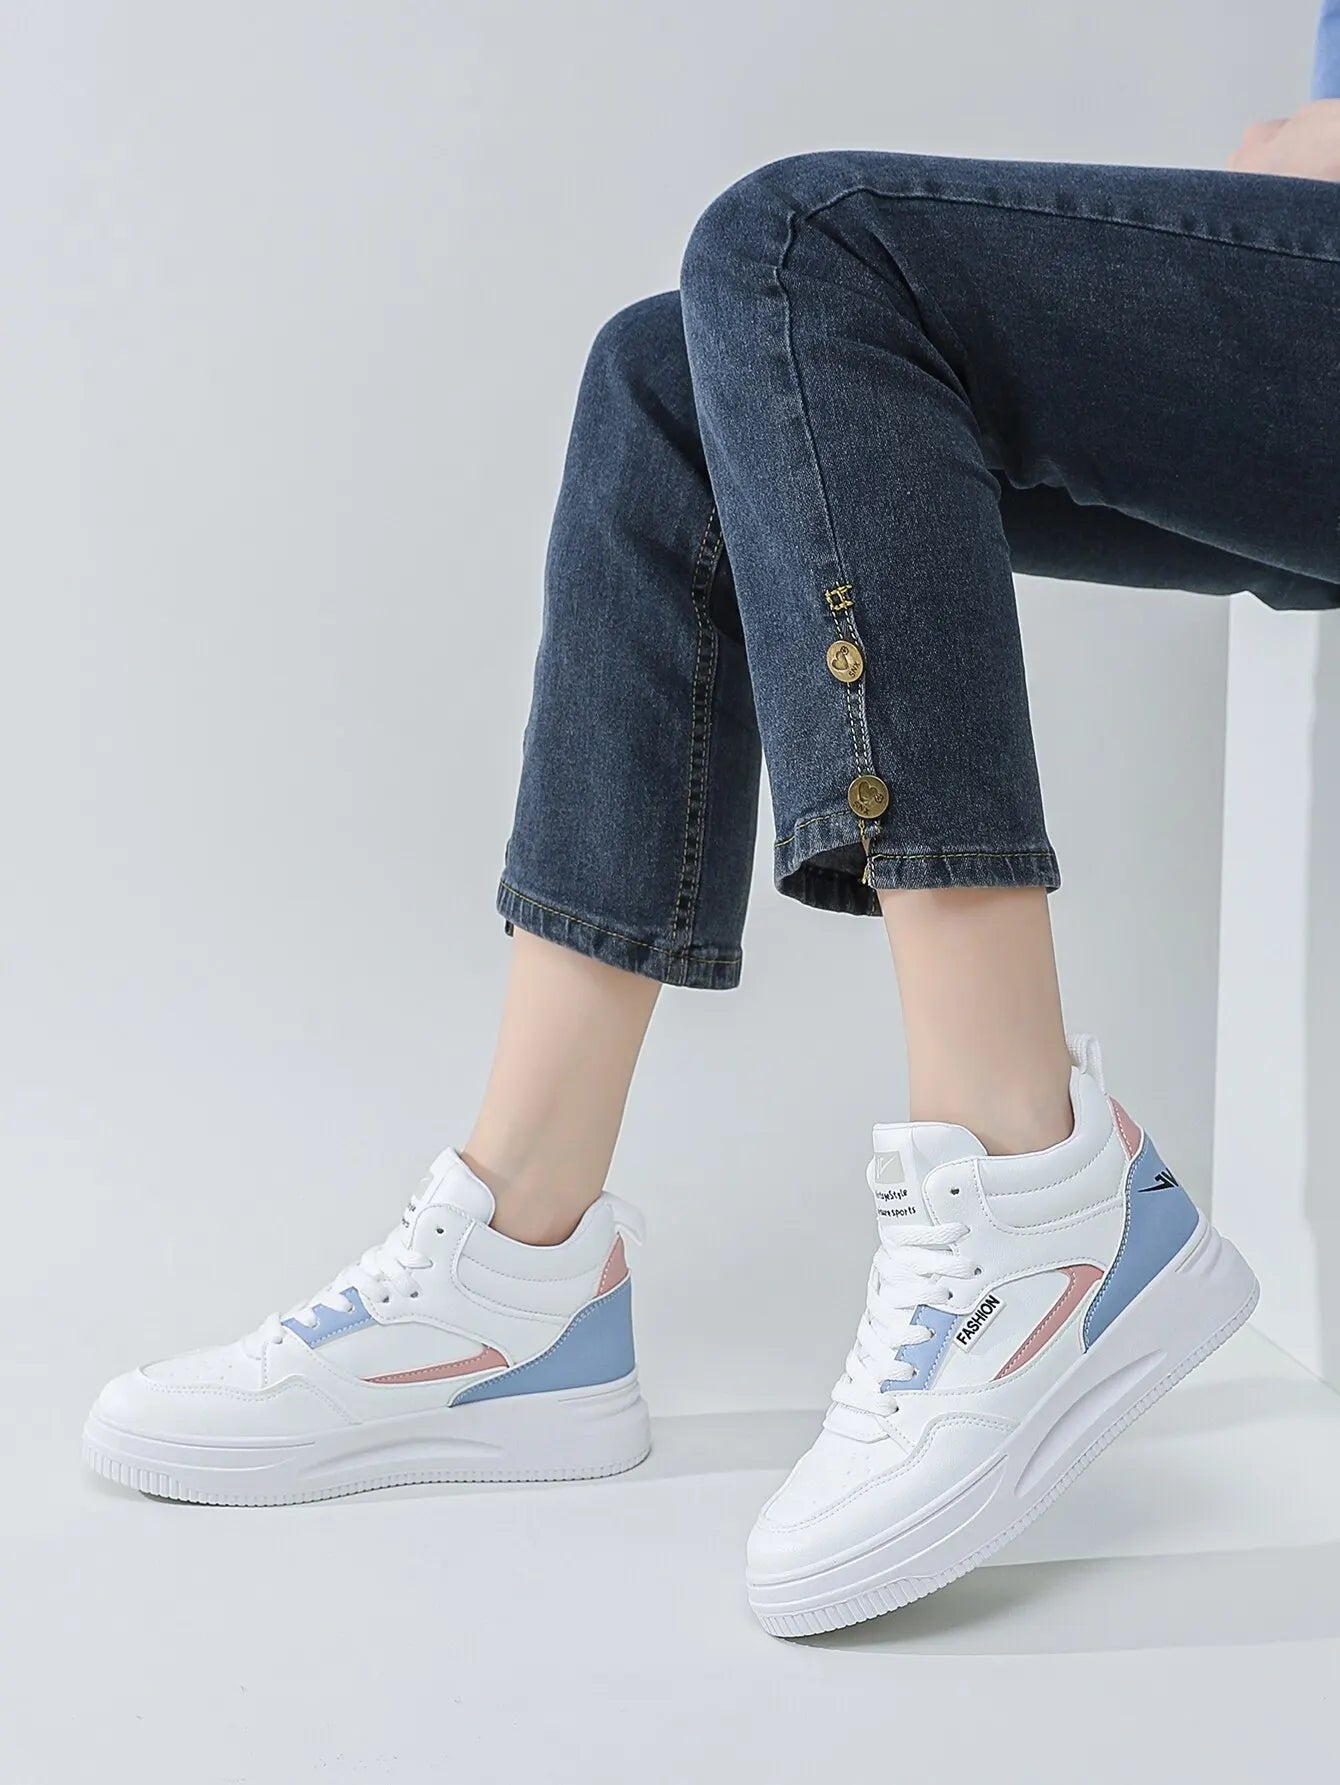 Women's Lace-Up High-top Sneakers Lightweight Sneakers